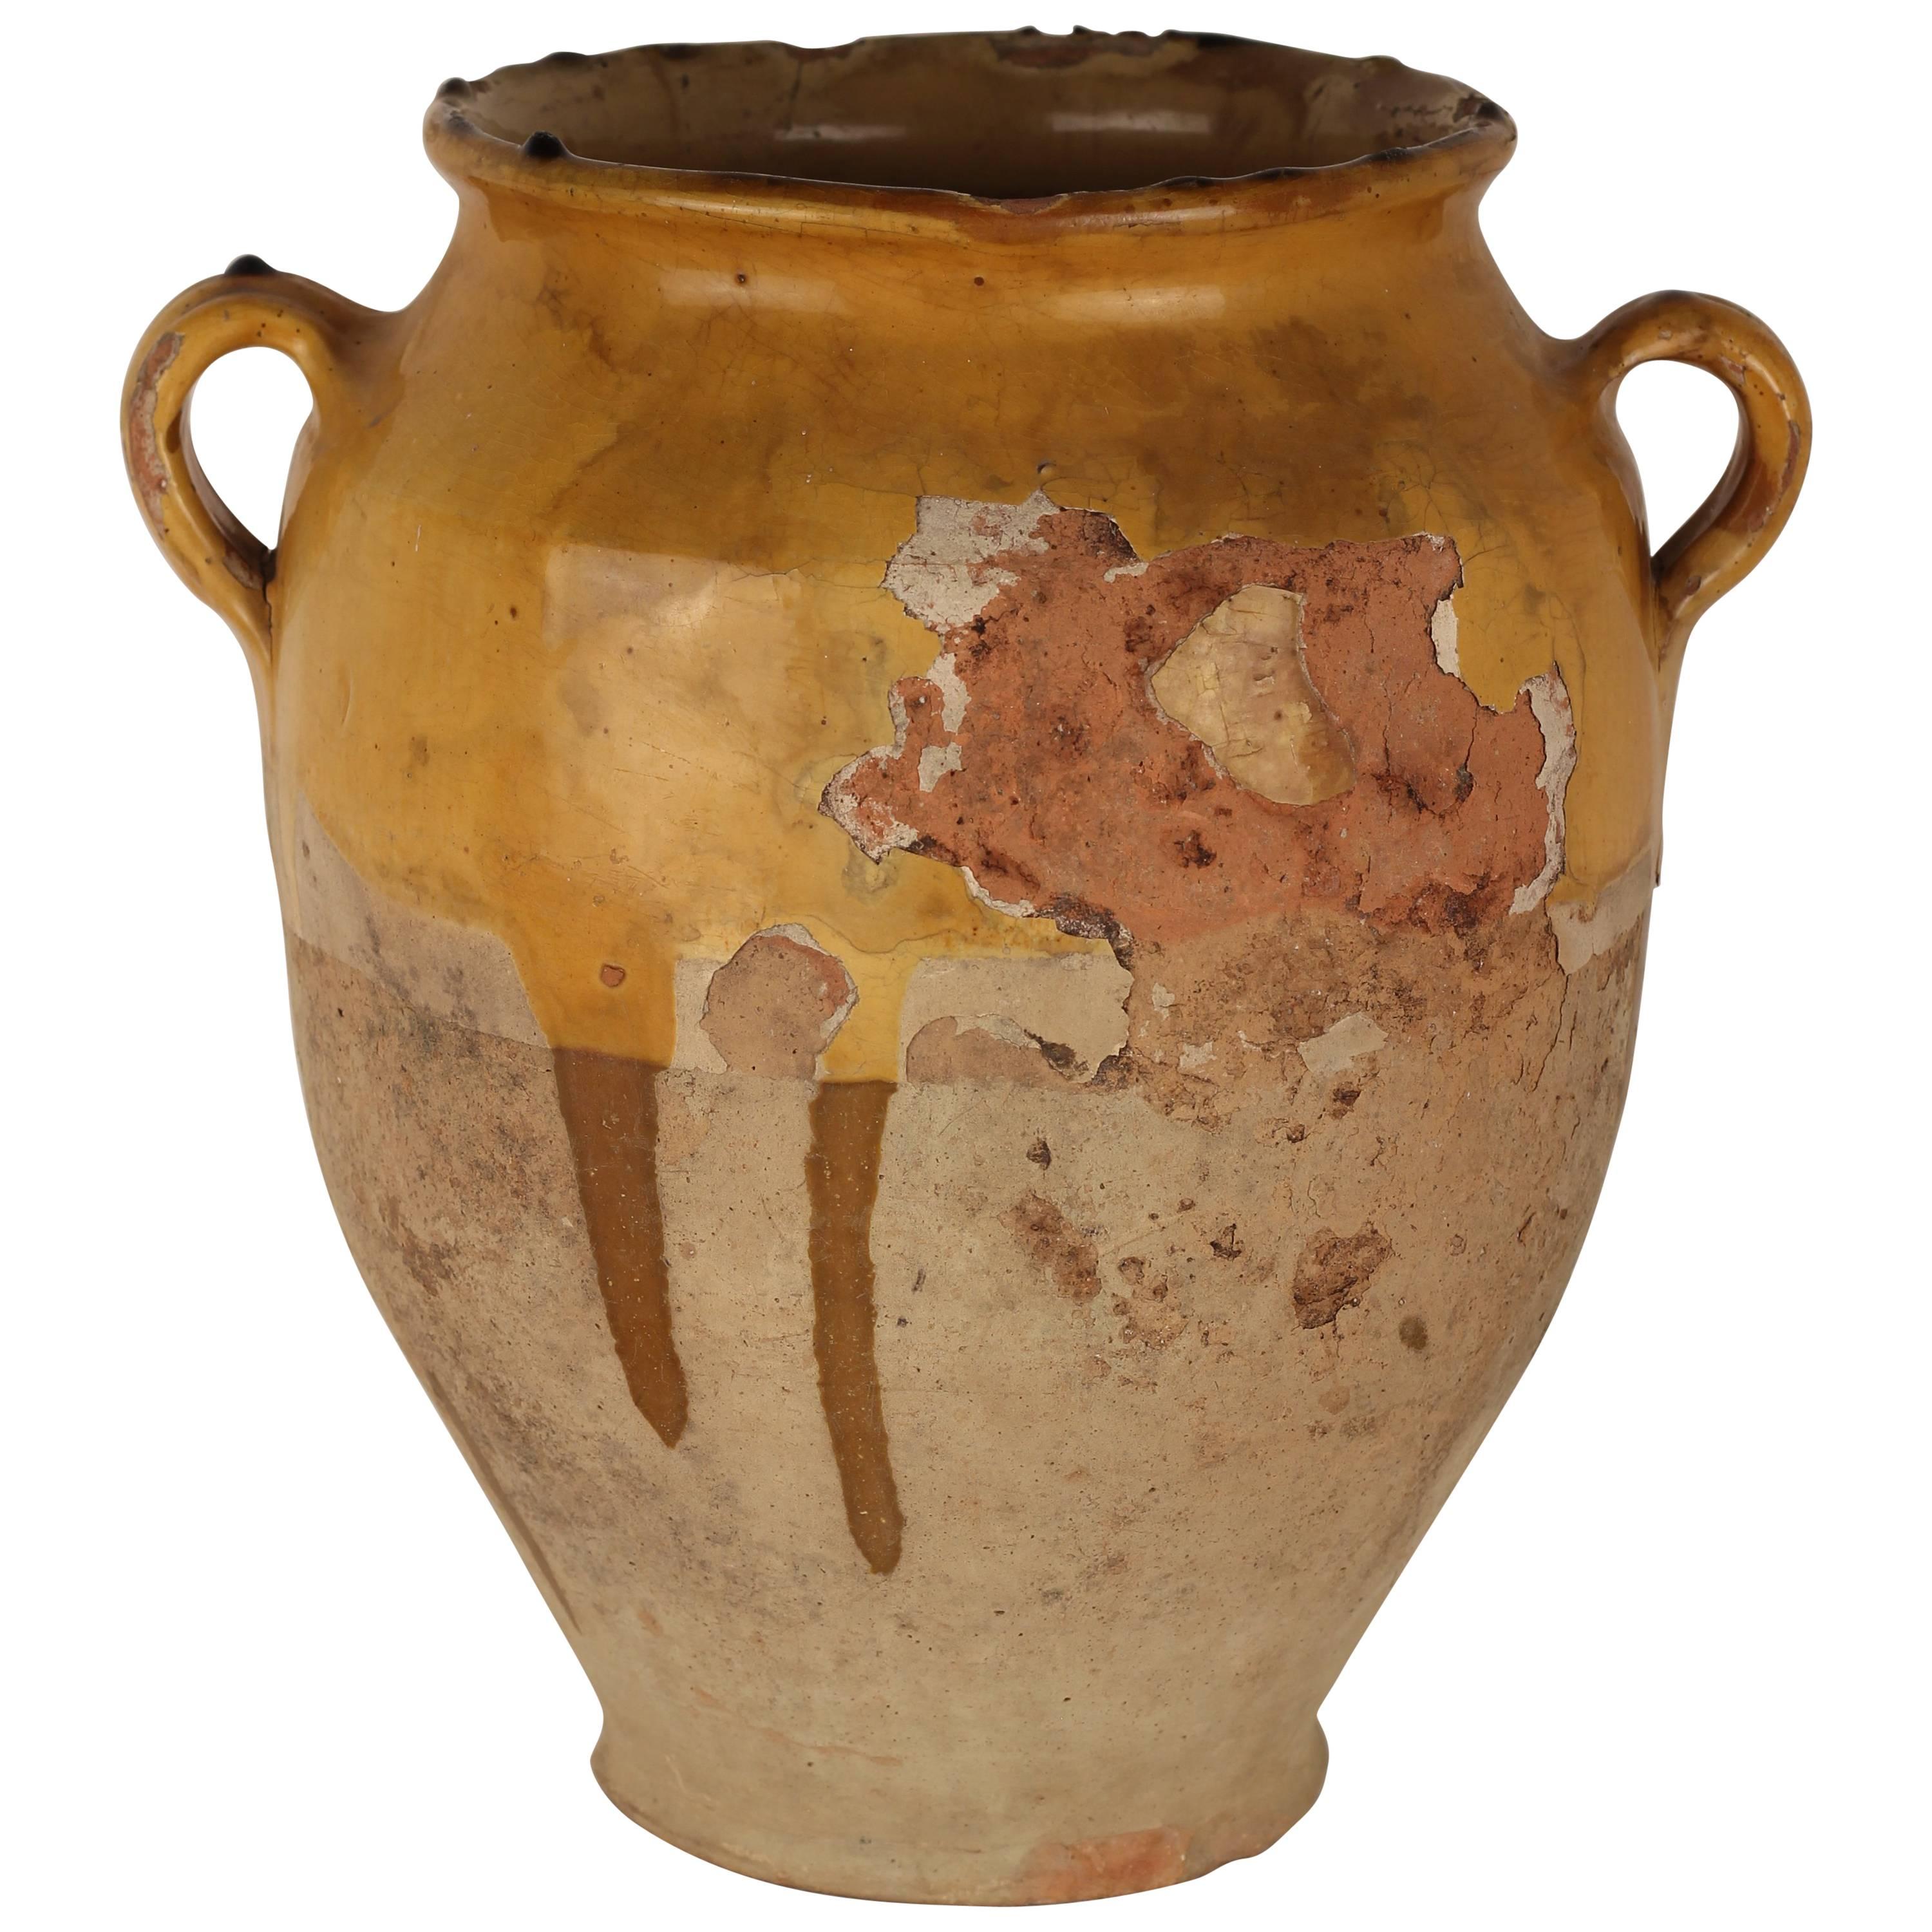 Confit Pot from the South of France, 19th Century